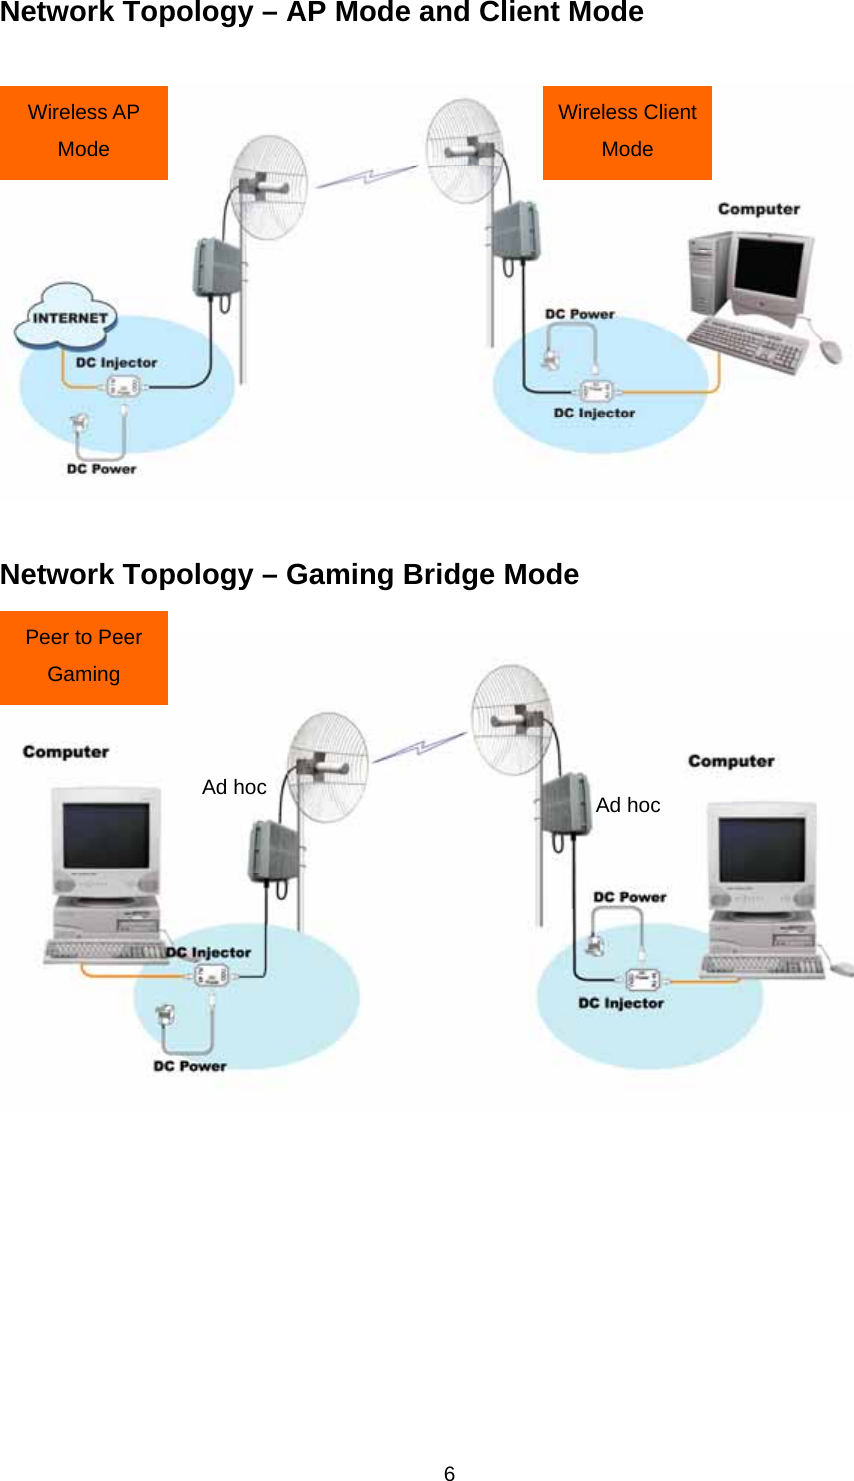 Network Topology – AP Mode and Client Mode   Wireless AP Mode Wireless Client Mode  Network Topology – Gaming Bridge Mode  Peer to Peer Gaming Ad hoc  Ad hoc  6